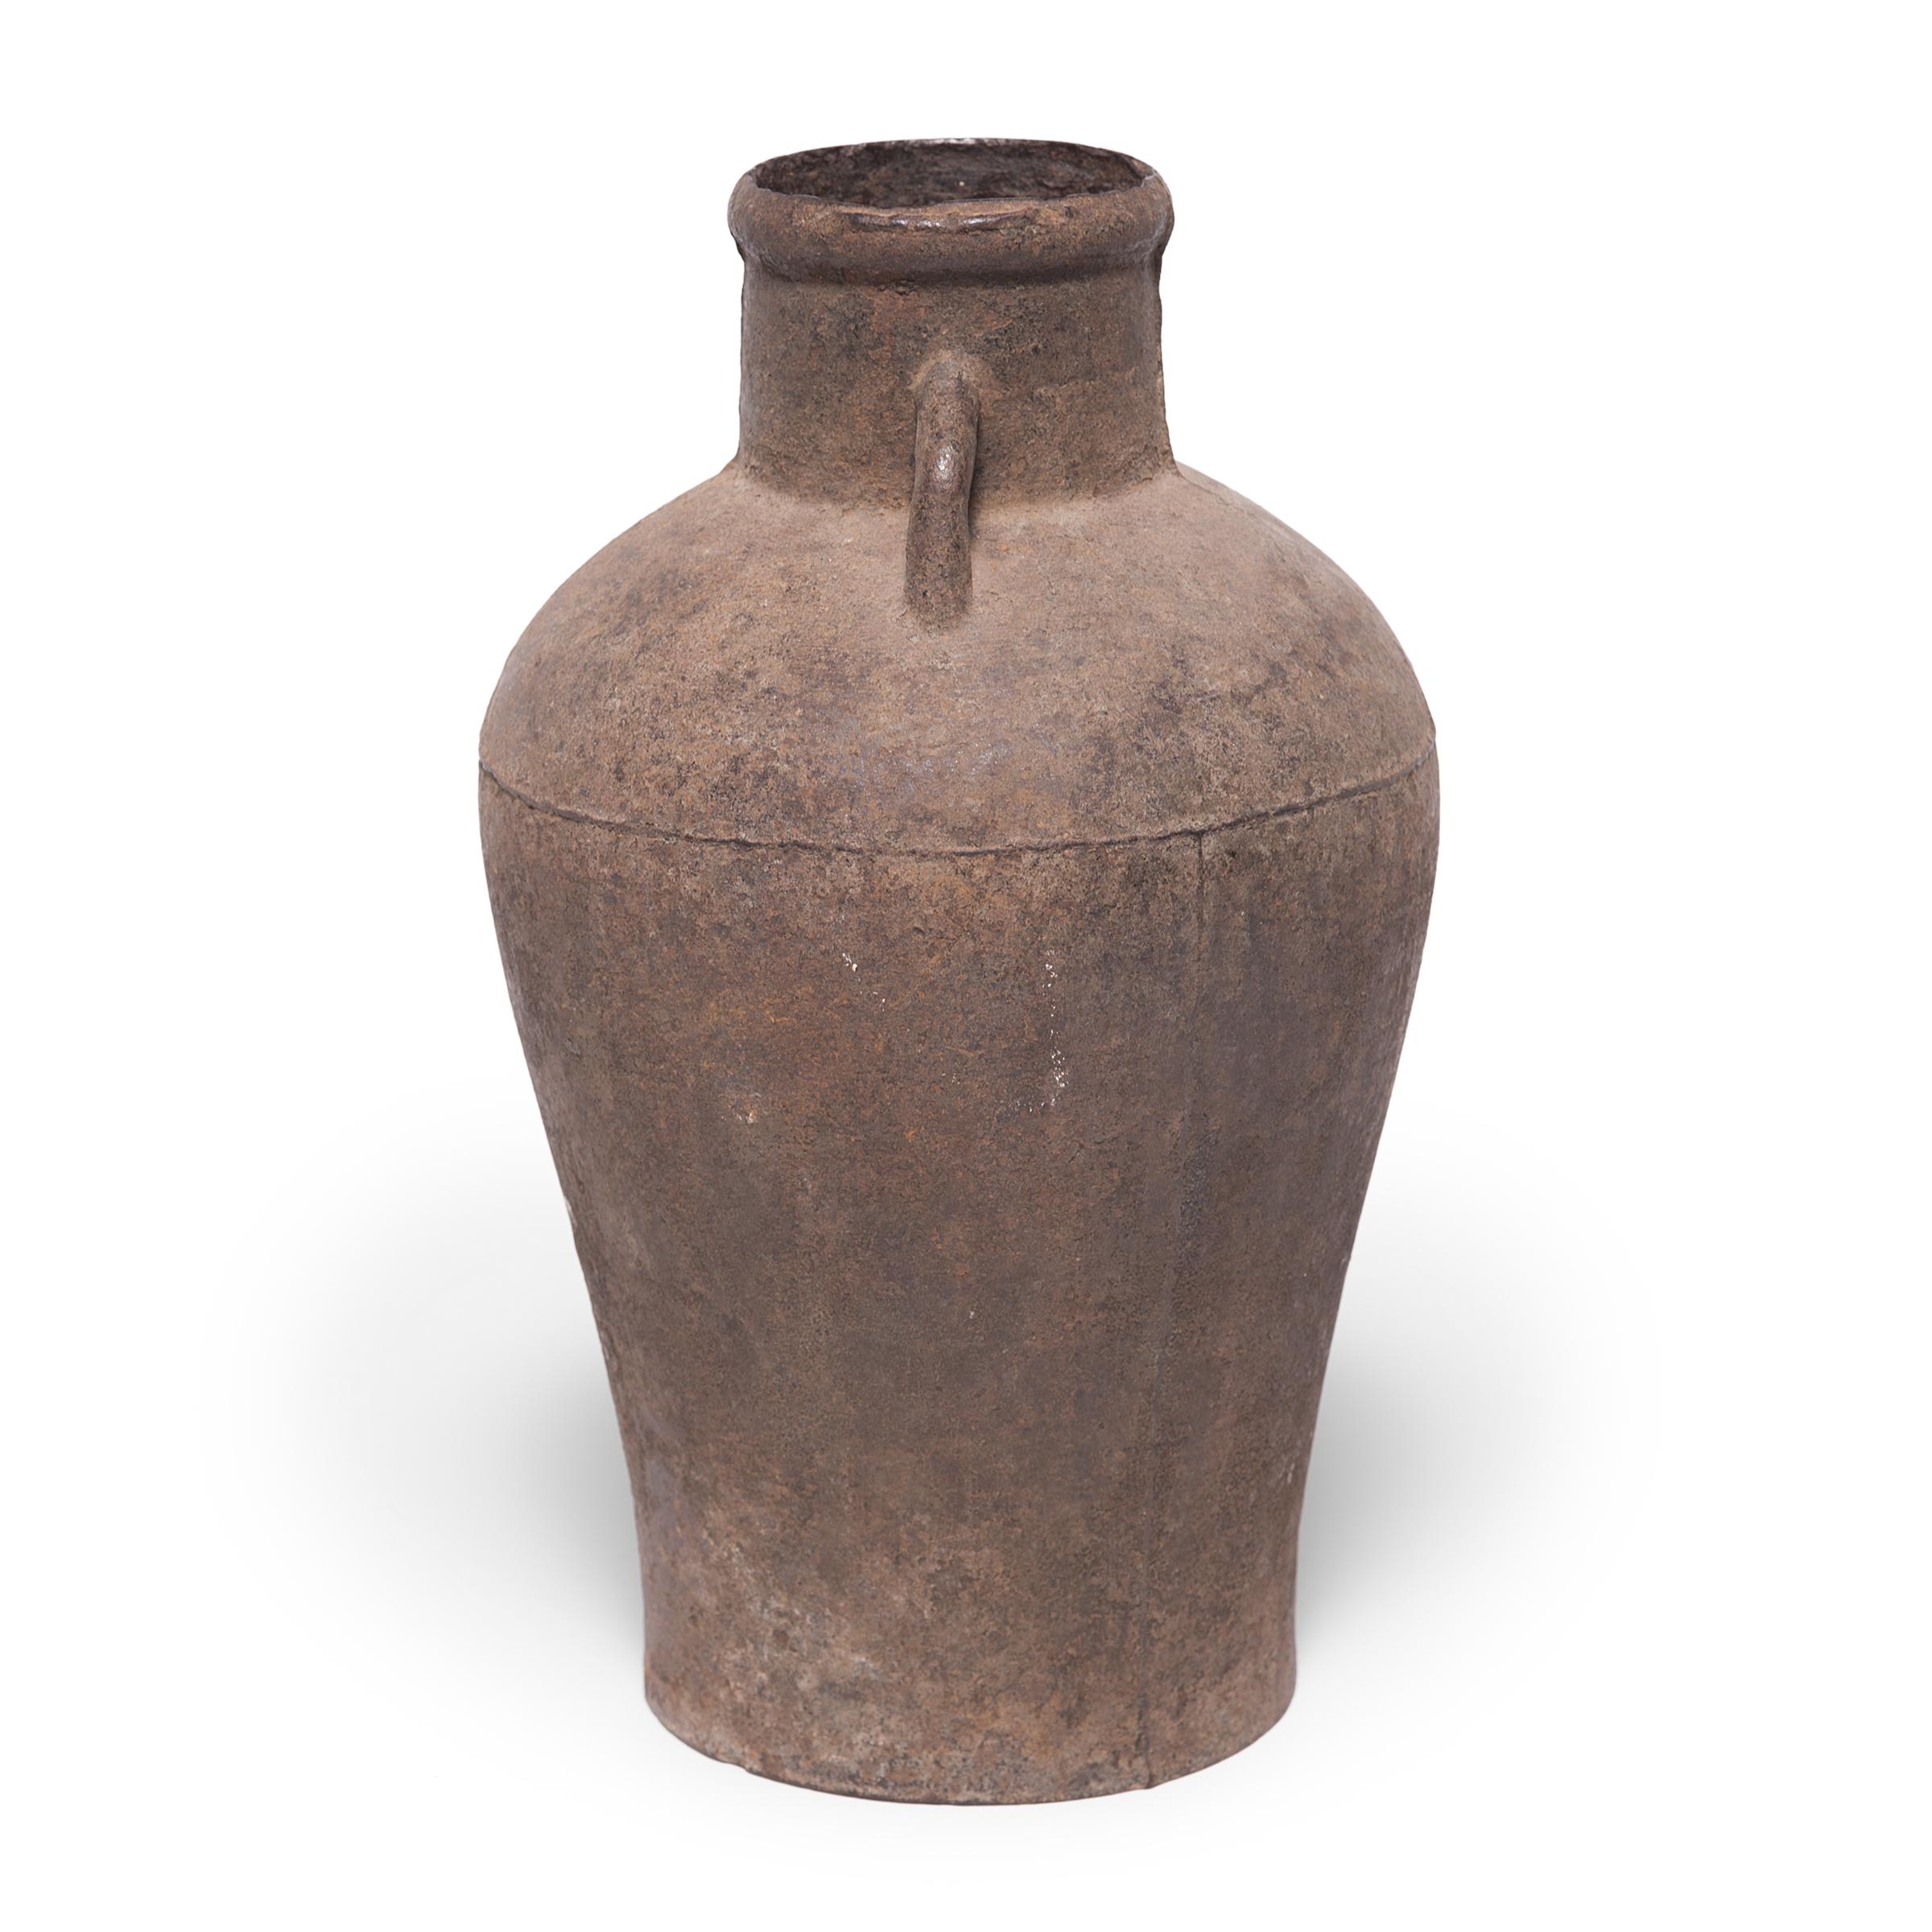 This cast-iron vessel has an elegant form reminiscent of the beautiful ironwork, bronzes, and ceramics perfected by Chinese artisans thousands of years ago. A century ago this jar would have been purely functional, but as the iron has gracefully